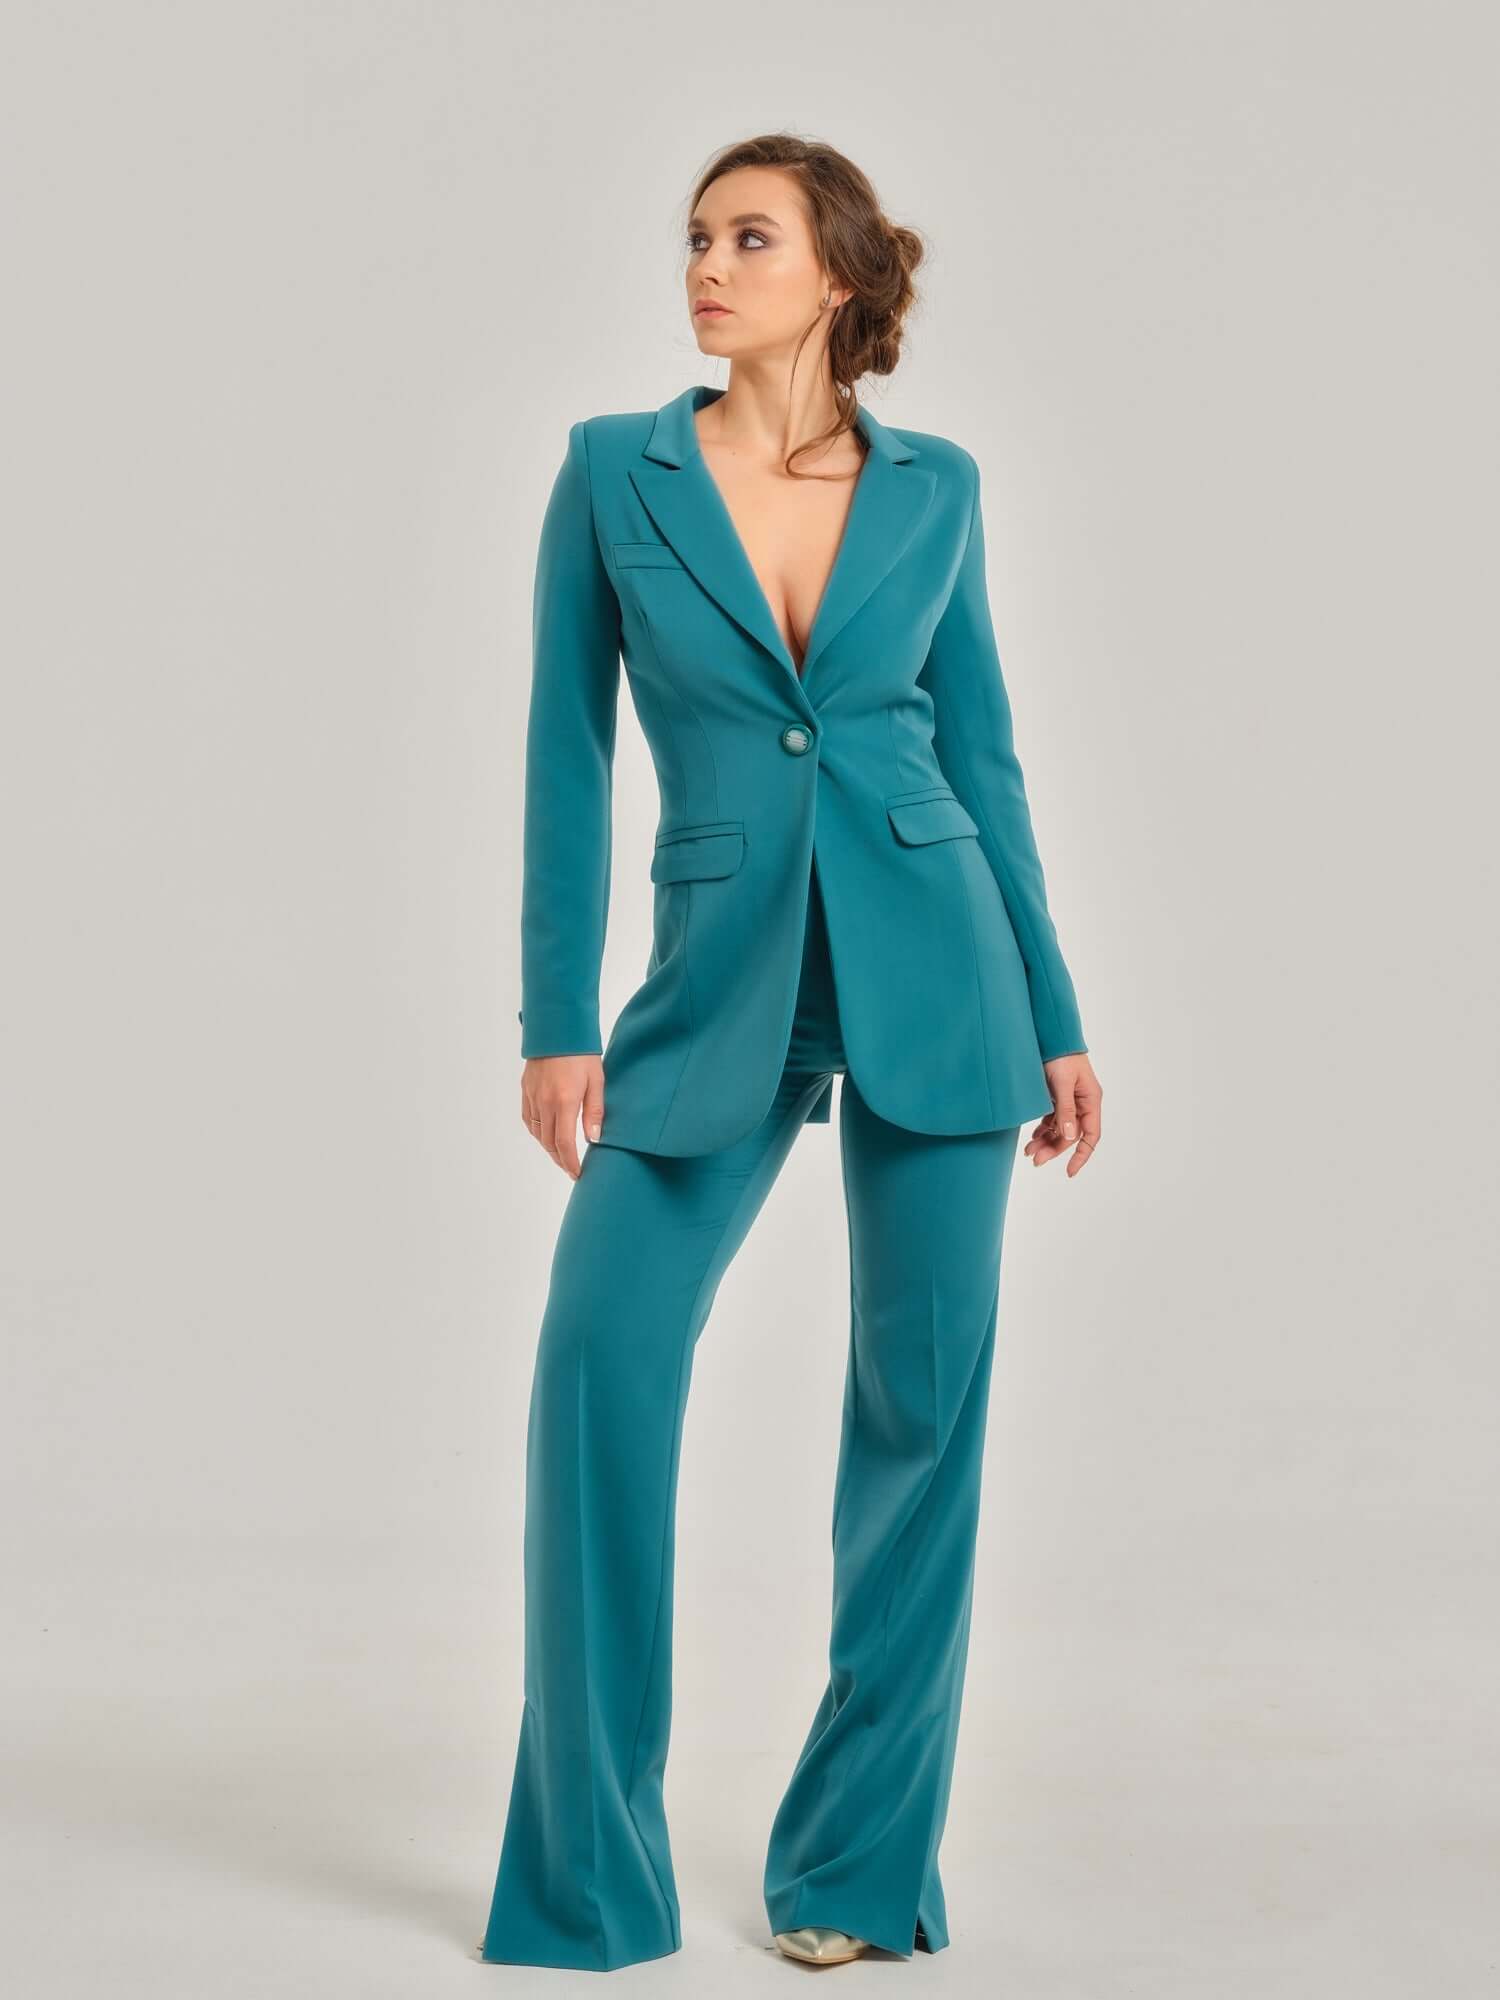 Tia Dorraine Magic Hour Timeless Classic Blazer This statement features a single large button closure that emphasizes its streamlined design. It stands out with its structured shoulders, beautiful princess seams, and waist darts, giving you the perfect sh